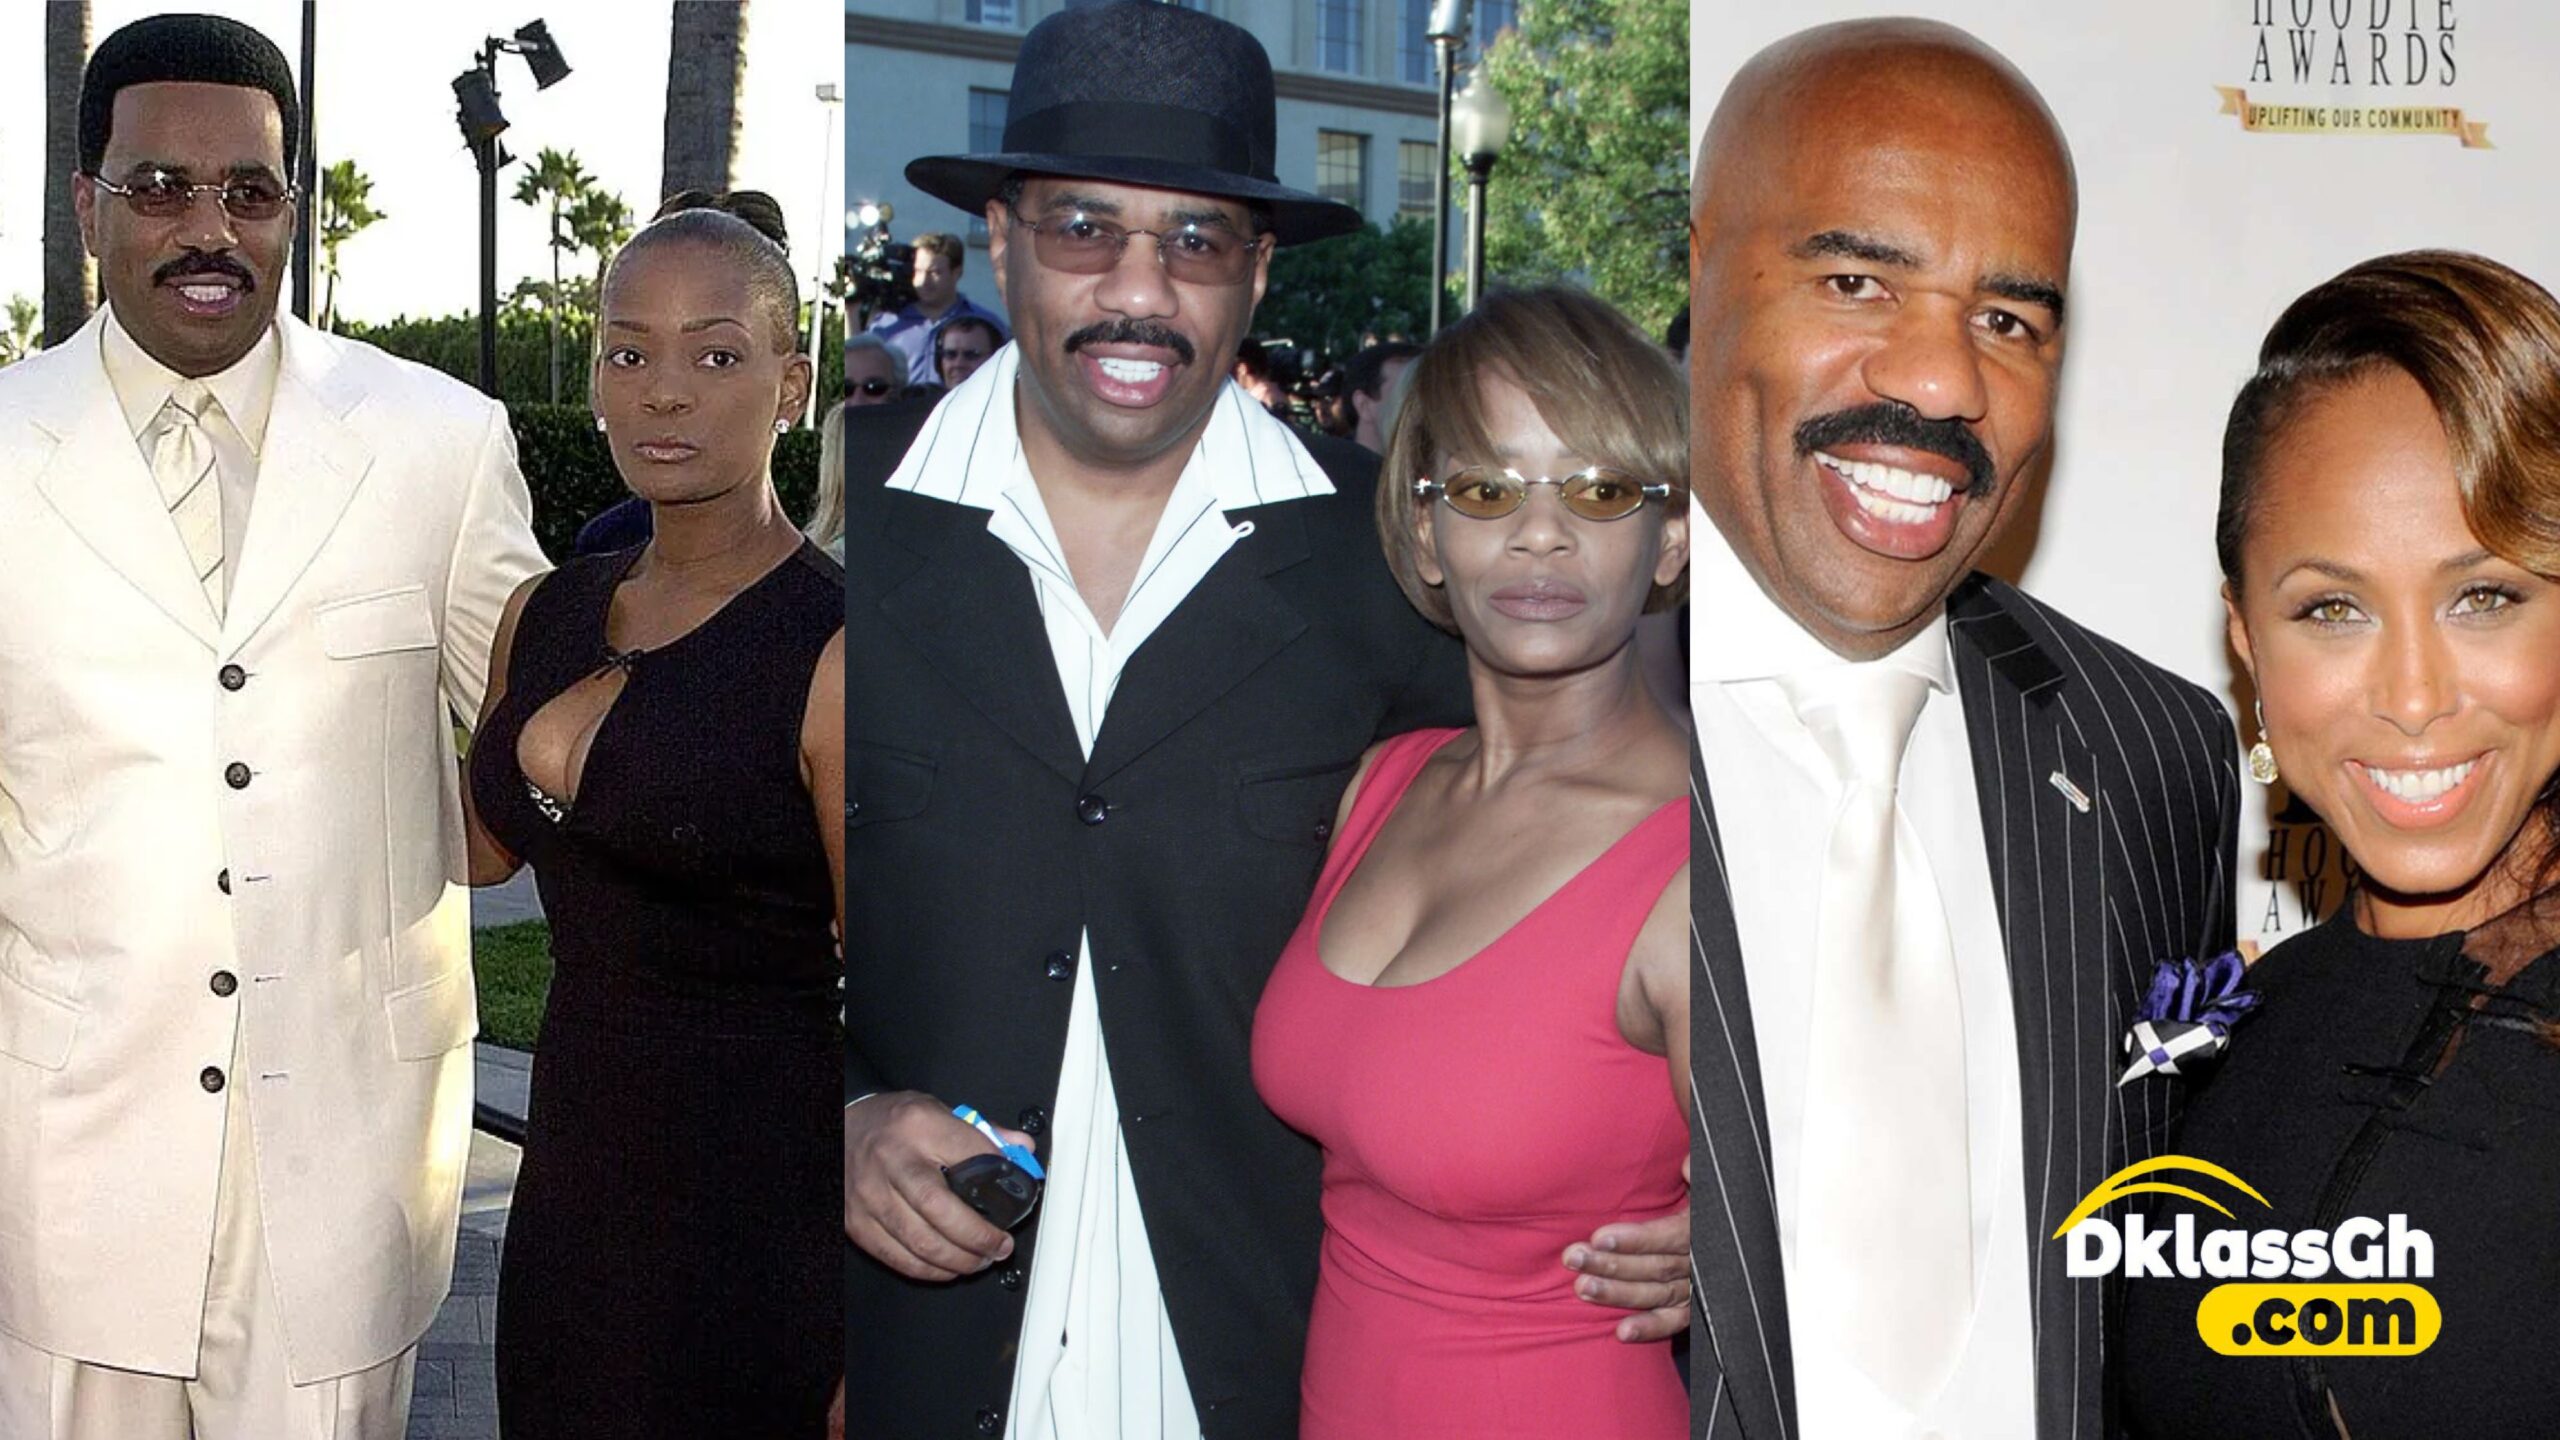 List of Steve Harvey’s past wives and divorces